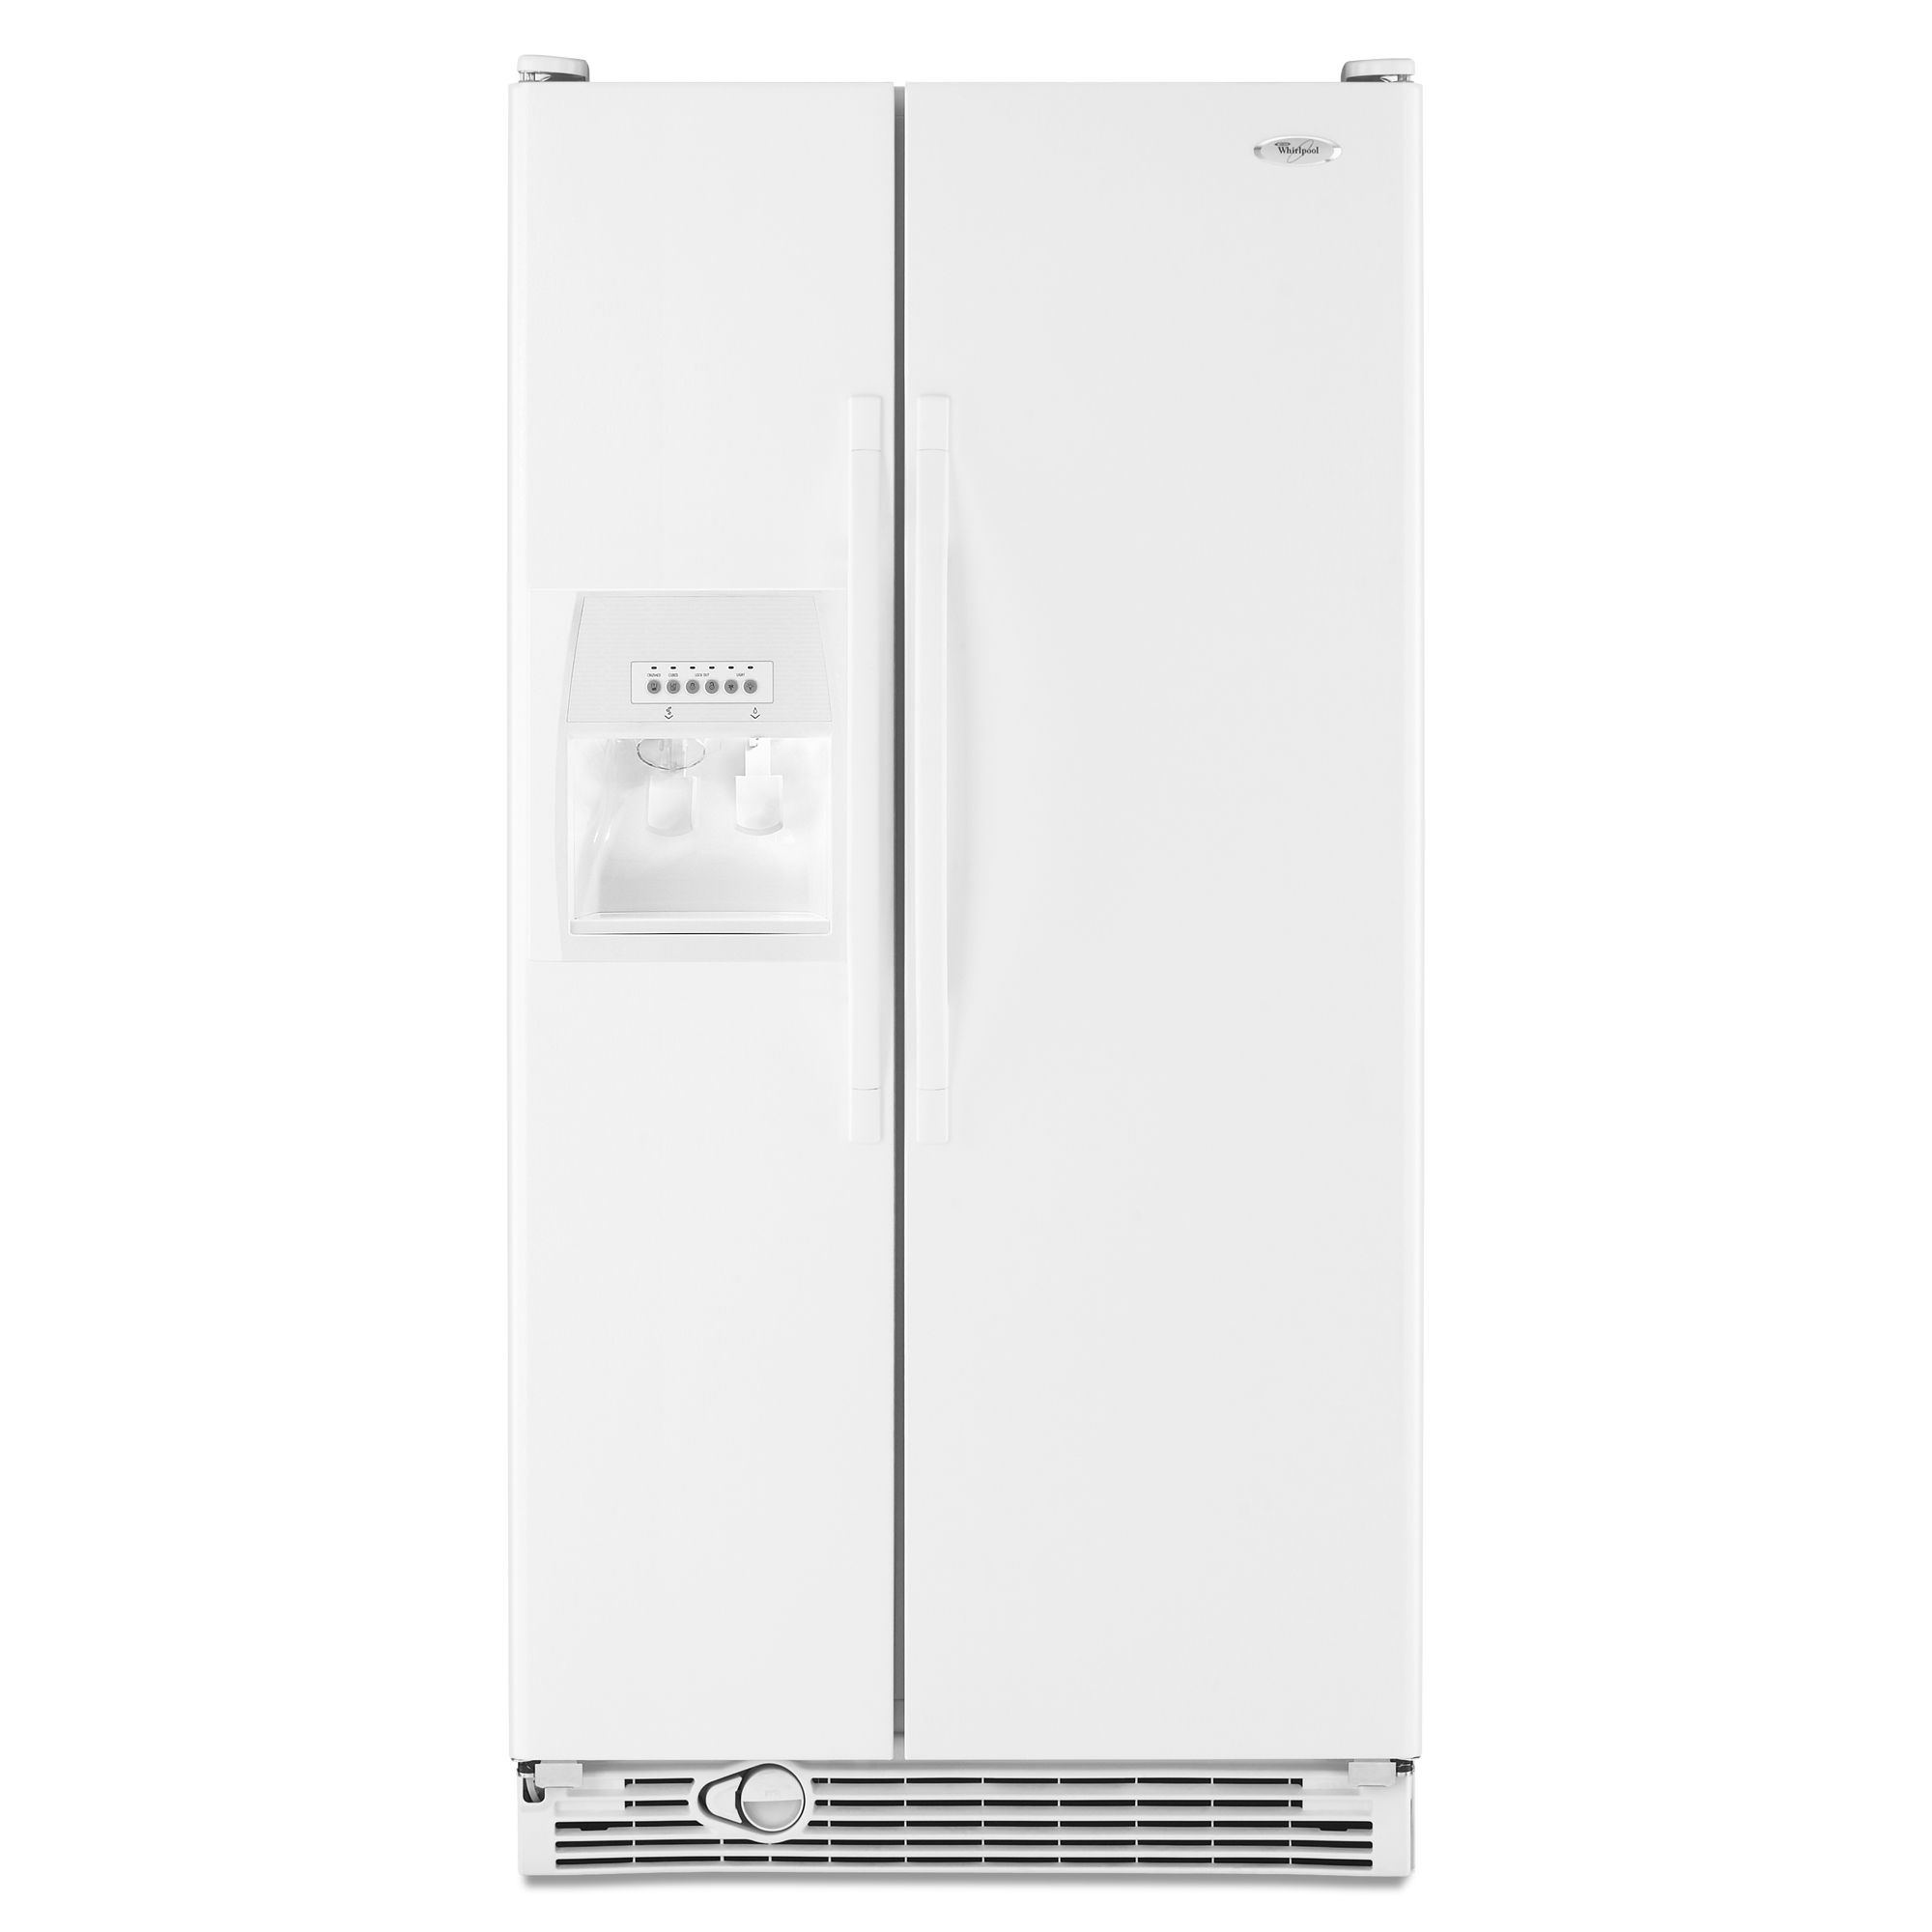 Whirlpool 25.1 cu. ft. Side-By-Side Refrigerator - White